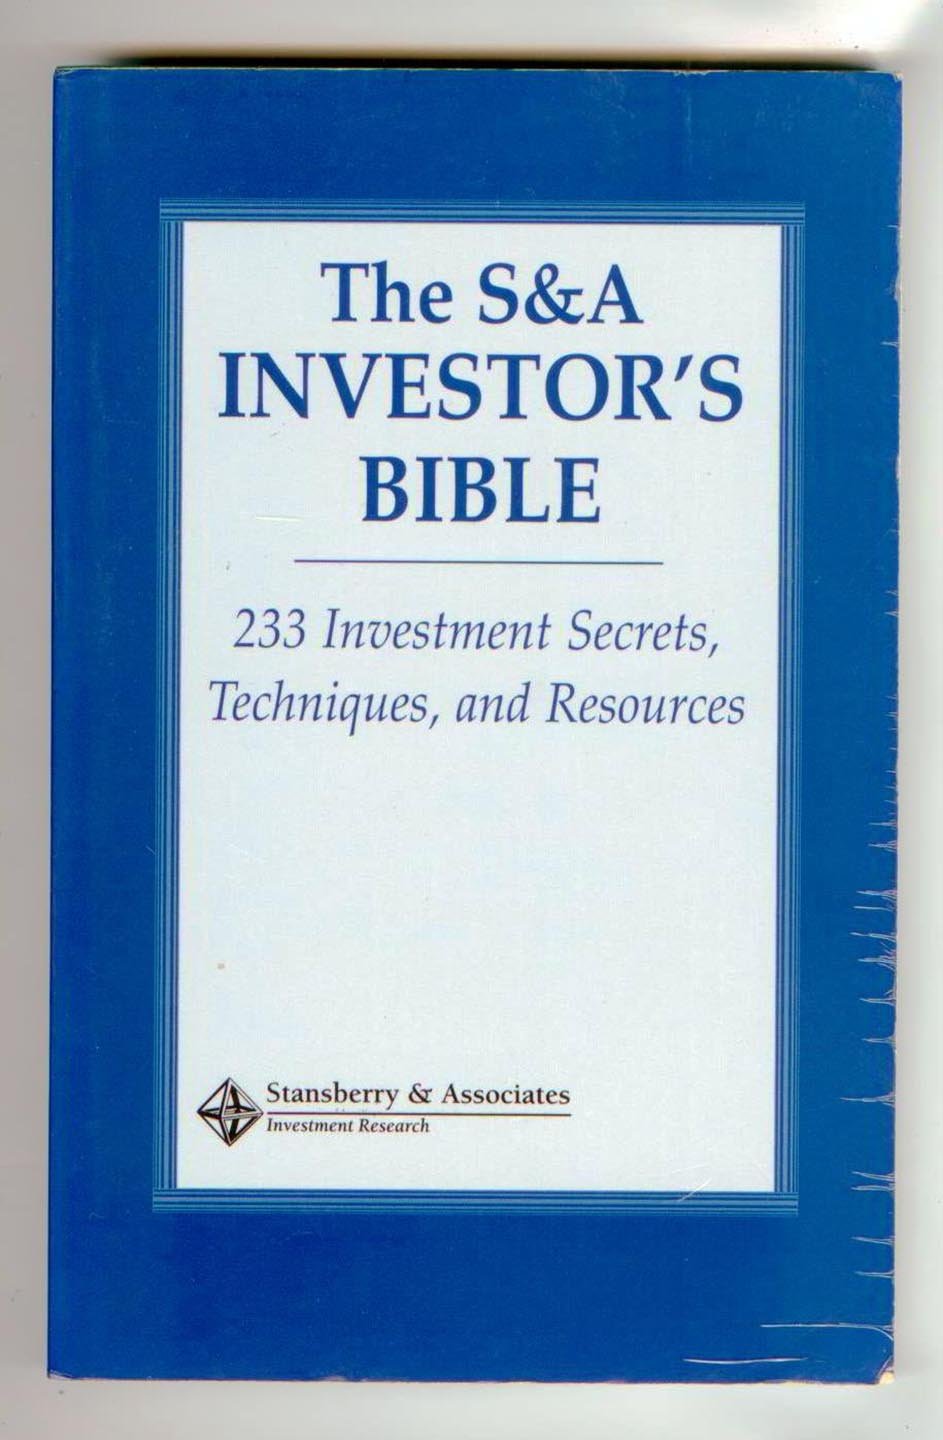 The S&A Investor's Bible: 233 Investment Secrets, Techniques, and Resources